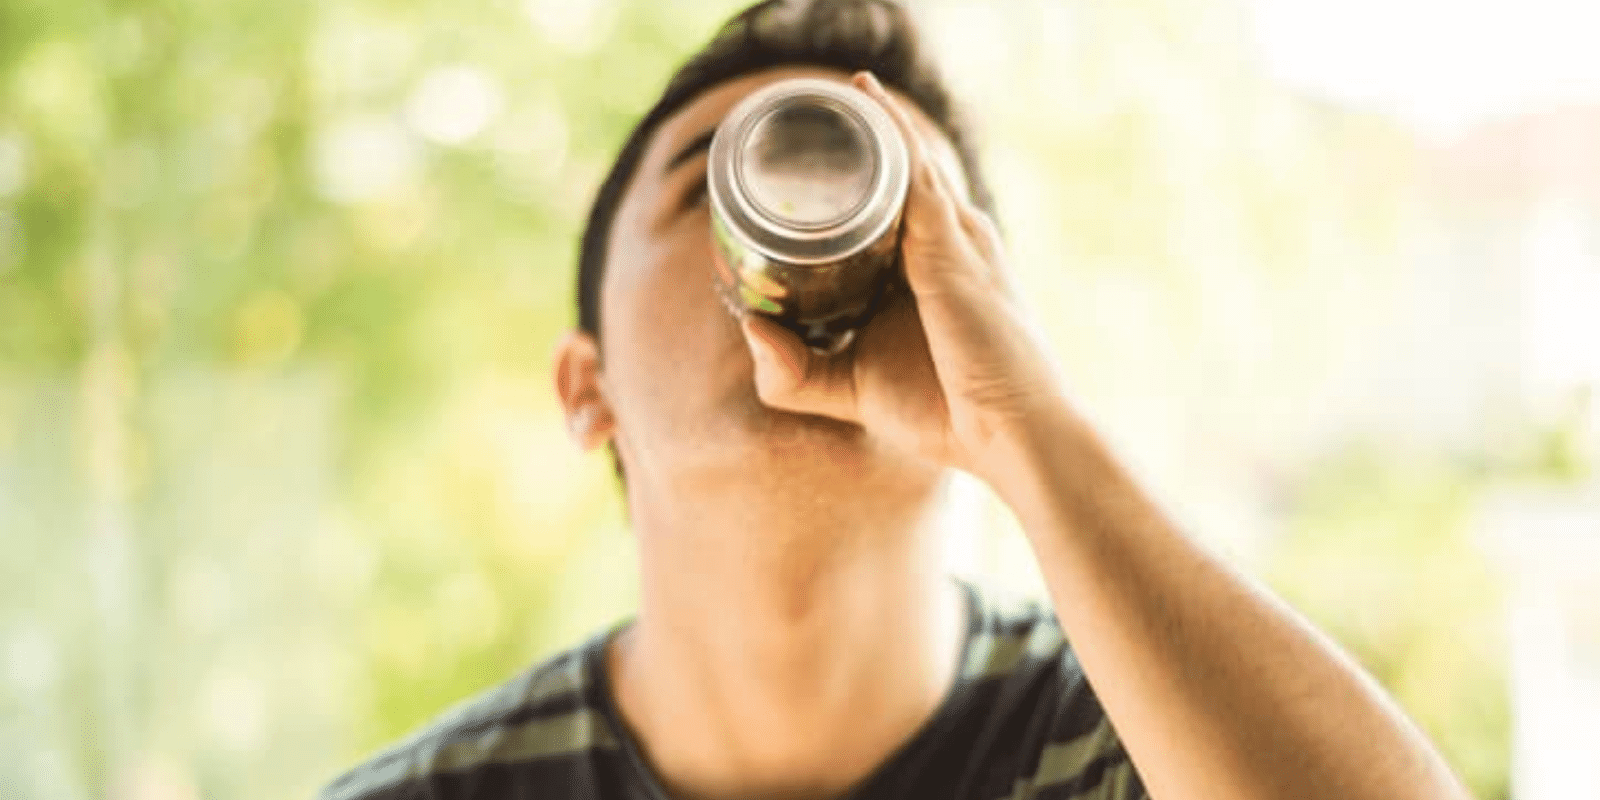 A teen boy drinking something from a can